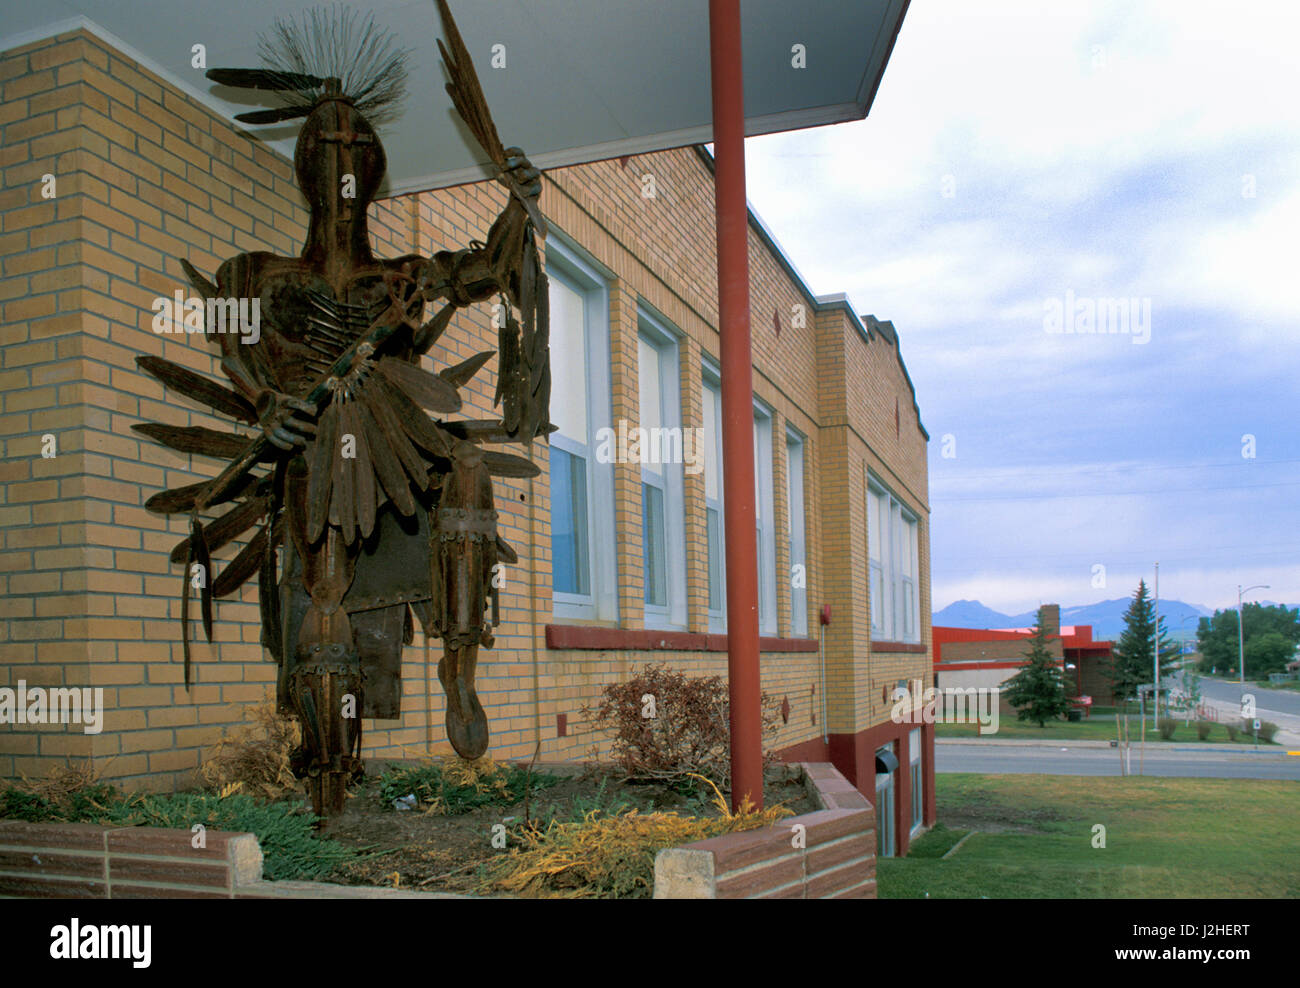 Metal art sculpture located at the front entrance to the Blackfeet high school located in Browning Montana on the Blackfeet Nation Indian Reservation Stock Photo